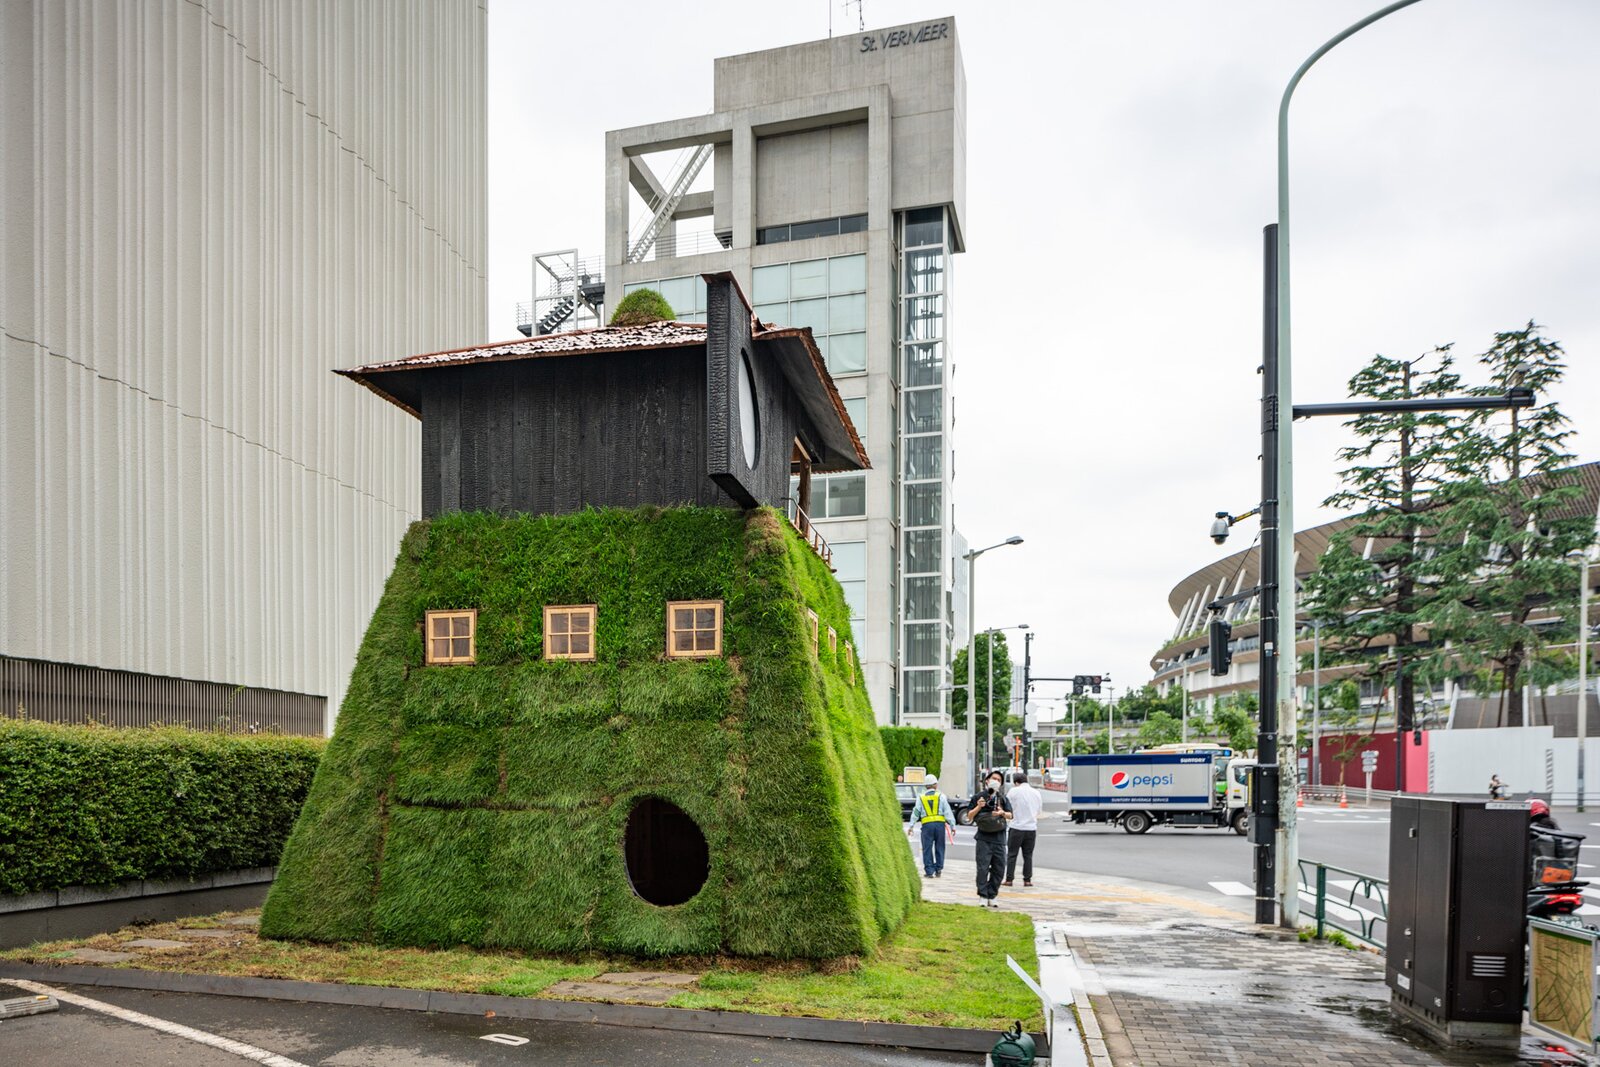 A Whimsical Teahouse Pops Up on a Grassy Mound in the Middle of Tokyo